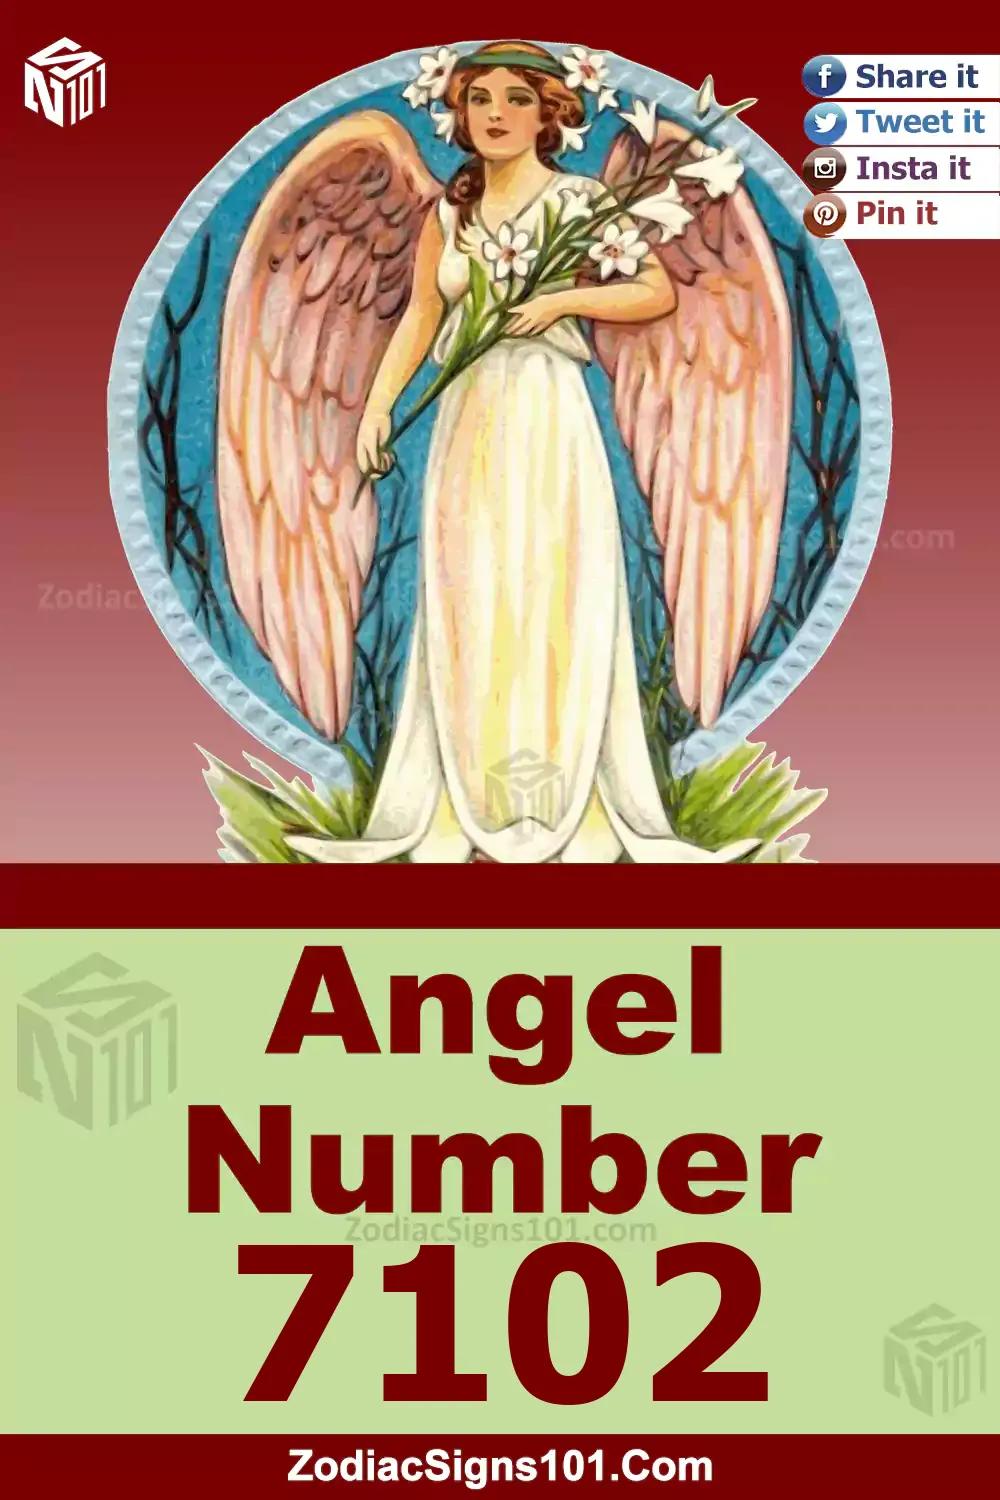 7102 Angel Number Meaning